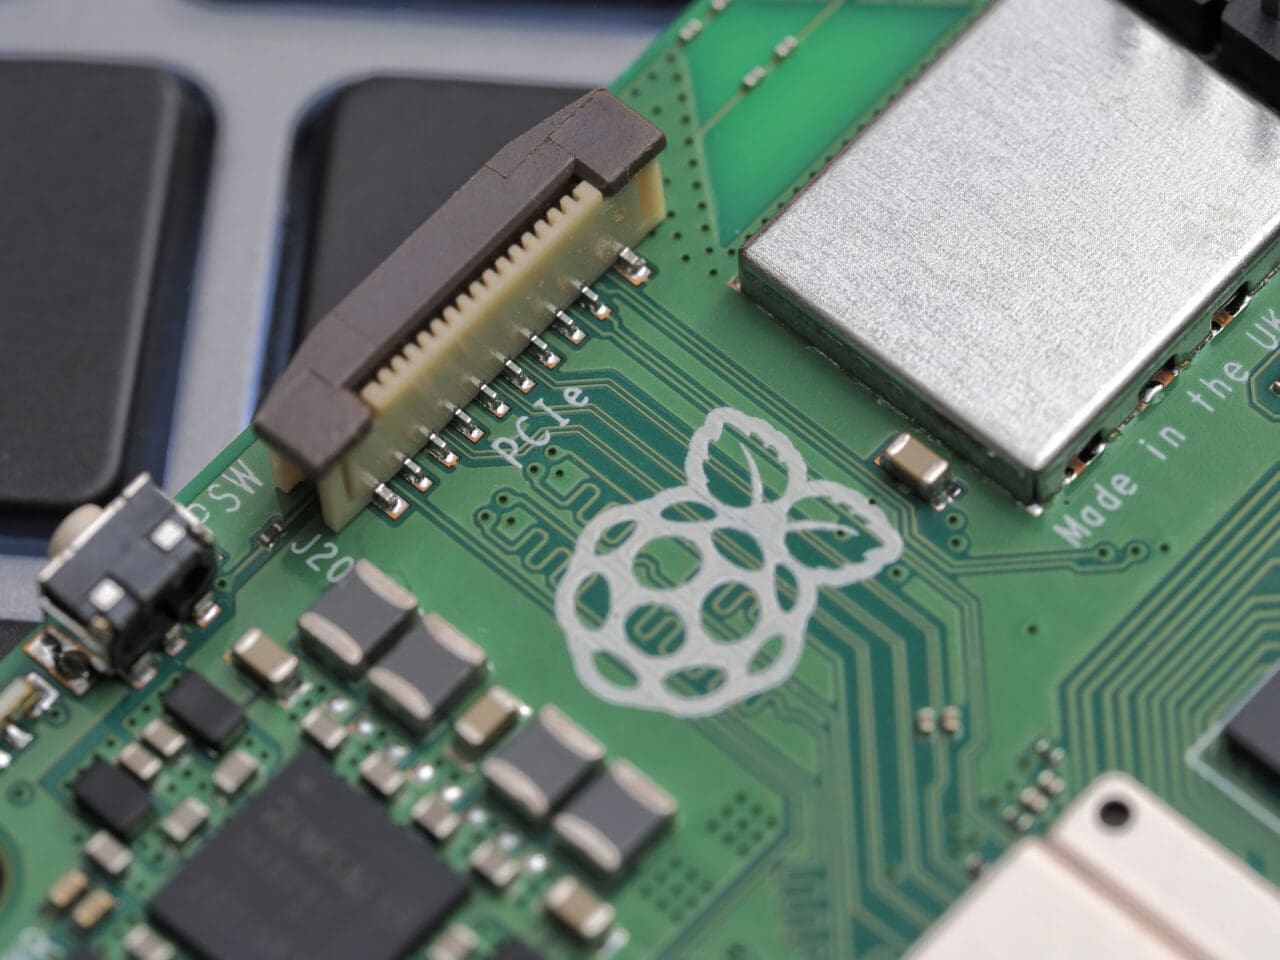 Close-up of a Raspberry Pi 5 logo on a laptop keyboard. The Raspberry Pi is a credit-card-sized single-board computer developed in the UK